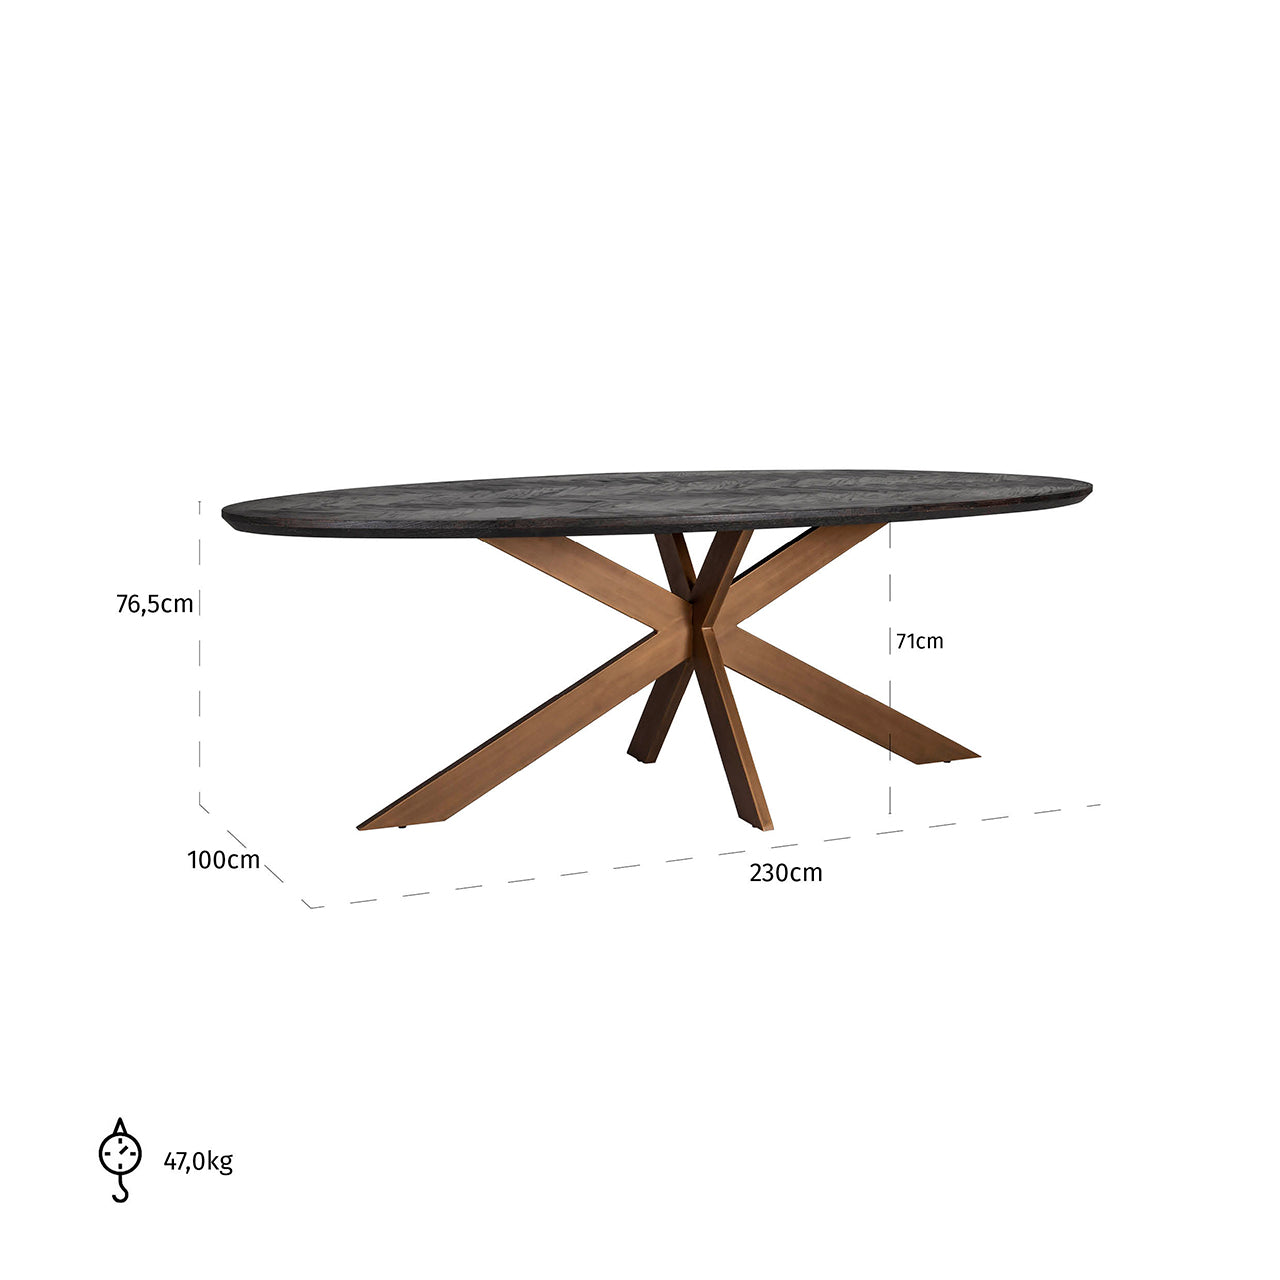 Arundel Brass Oval Dining Table - Pavilion Interiors